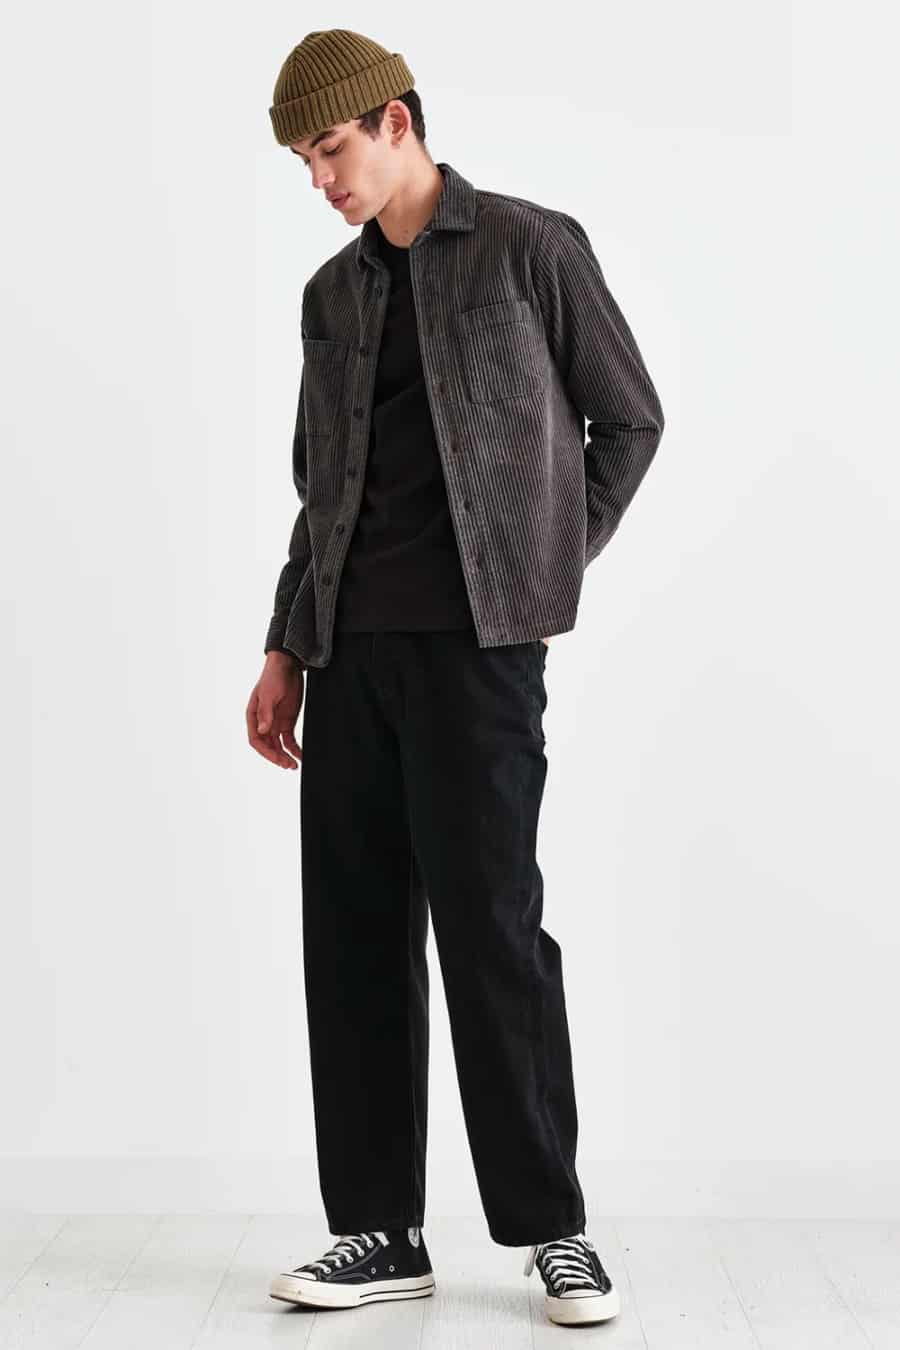 Men's black trousers, black T-shirt, corduroy overshirt, beanie and high-top sneakers outfit